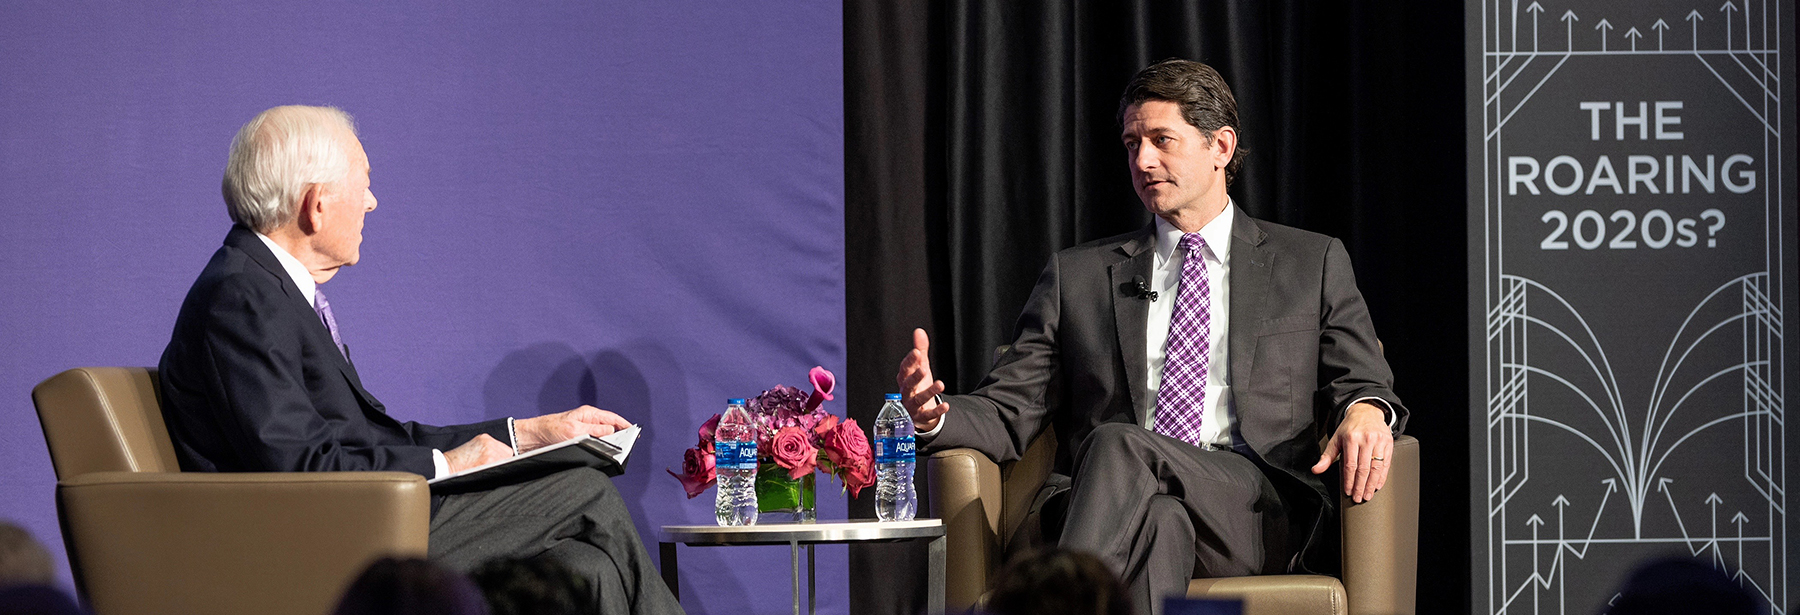 Section Image: Bob Schieffer and Paul Ryan on the stage at the Investment Strategy Conference 